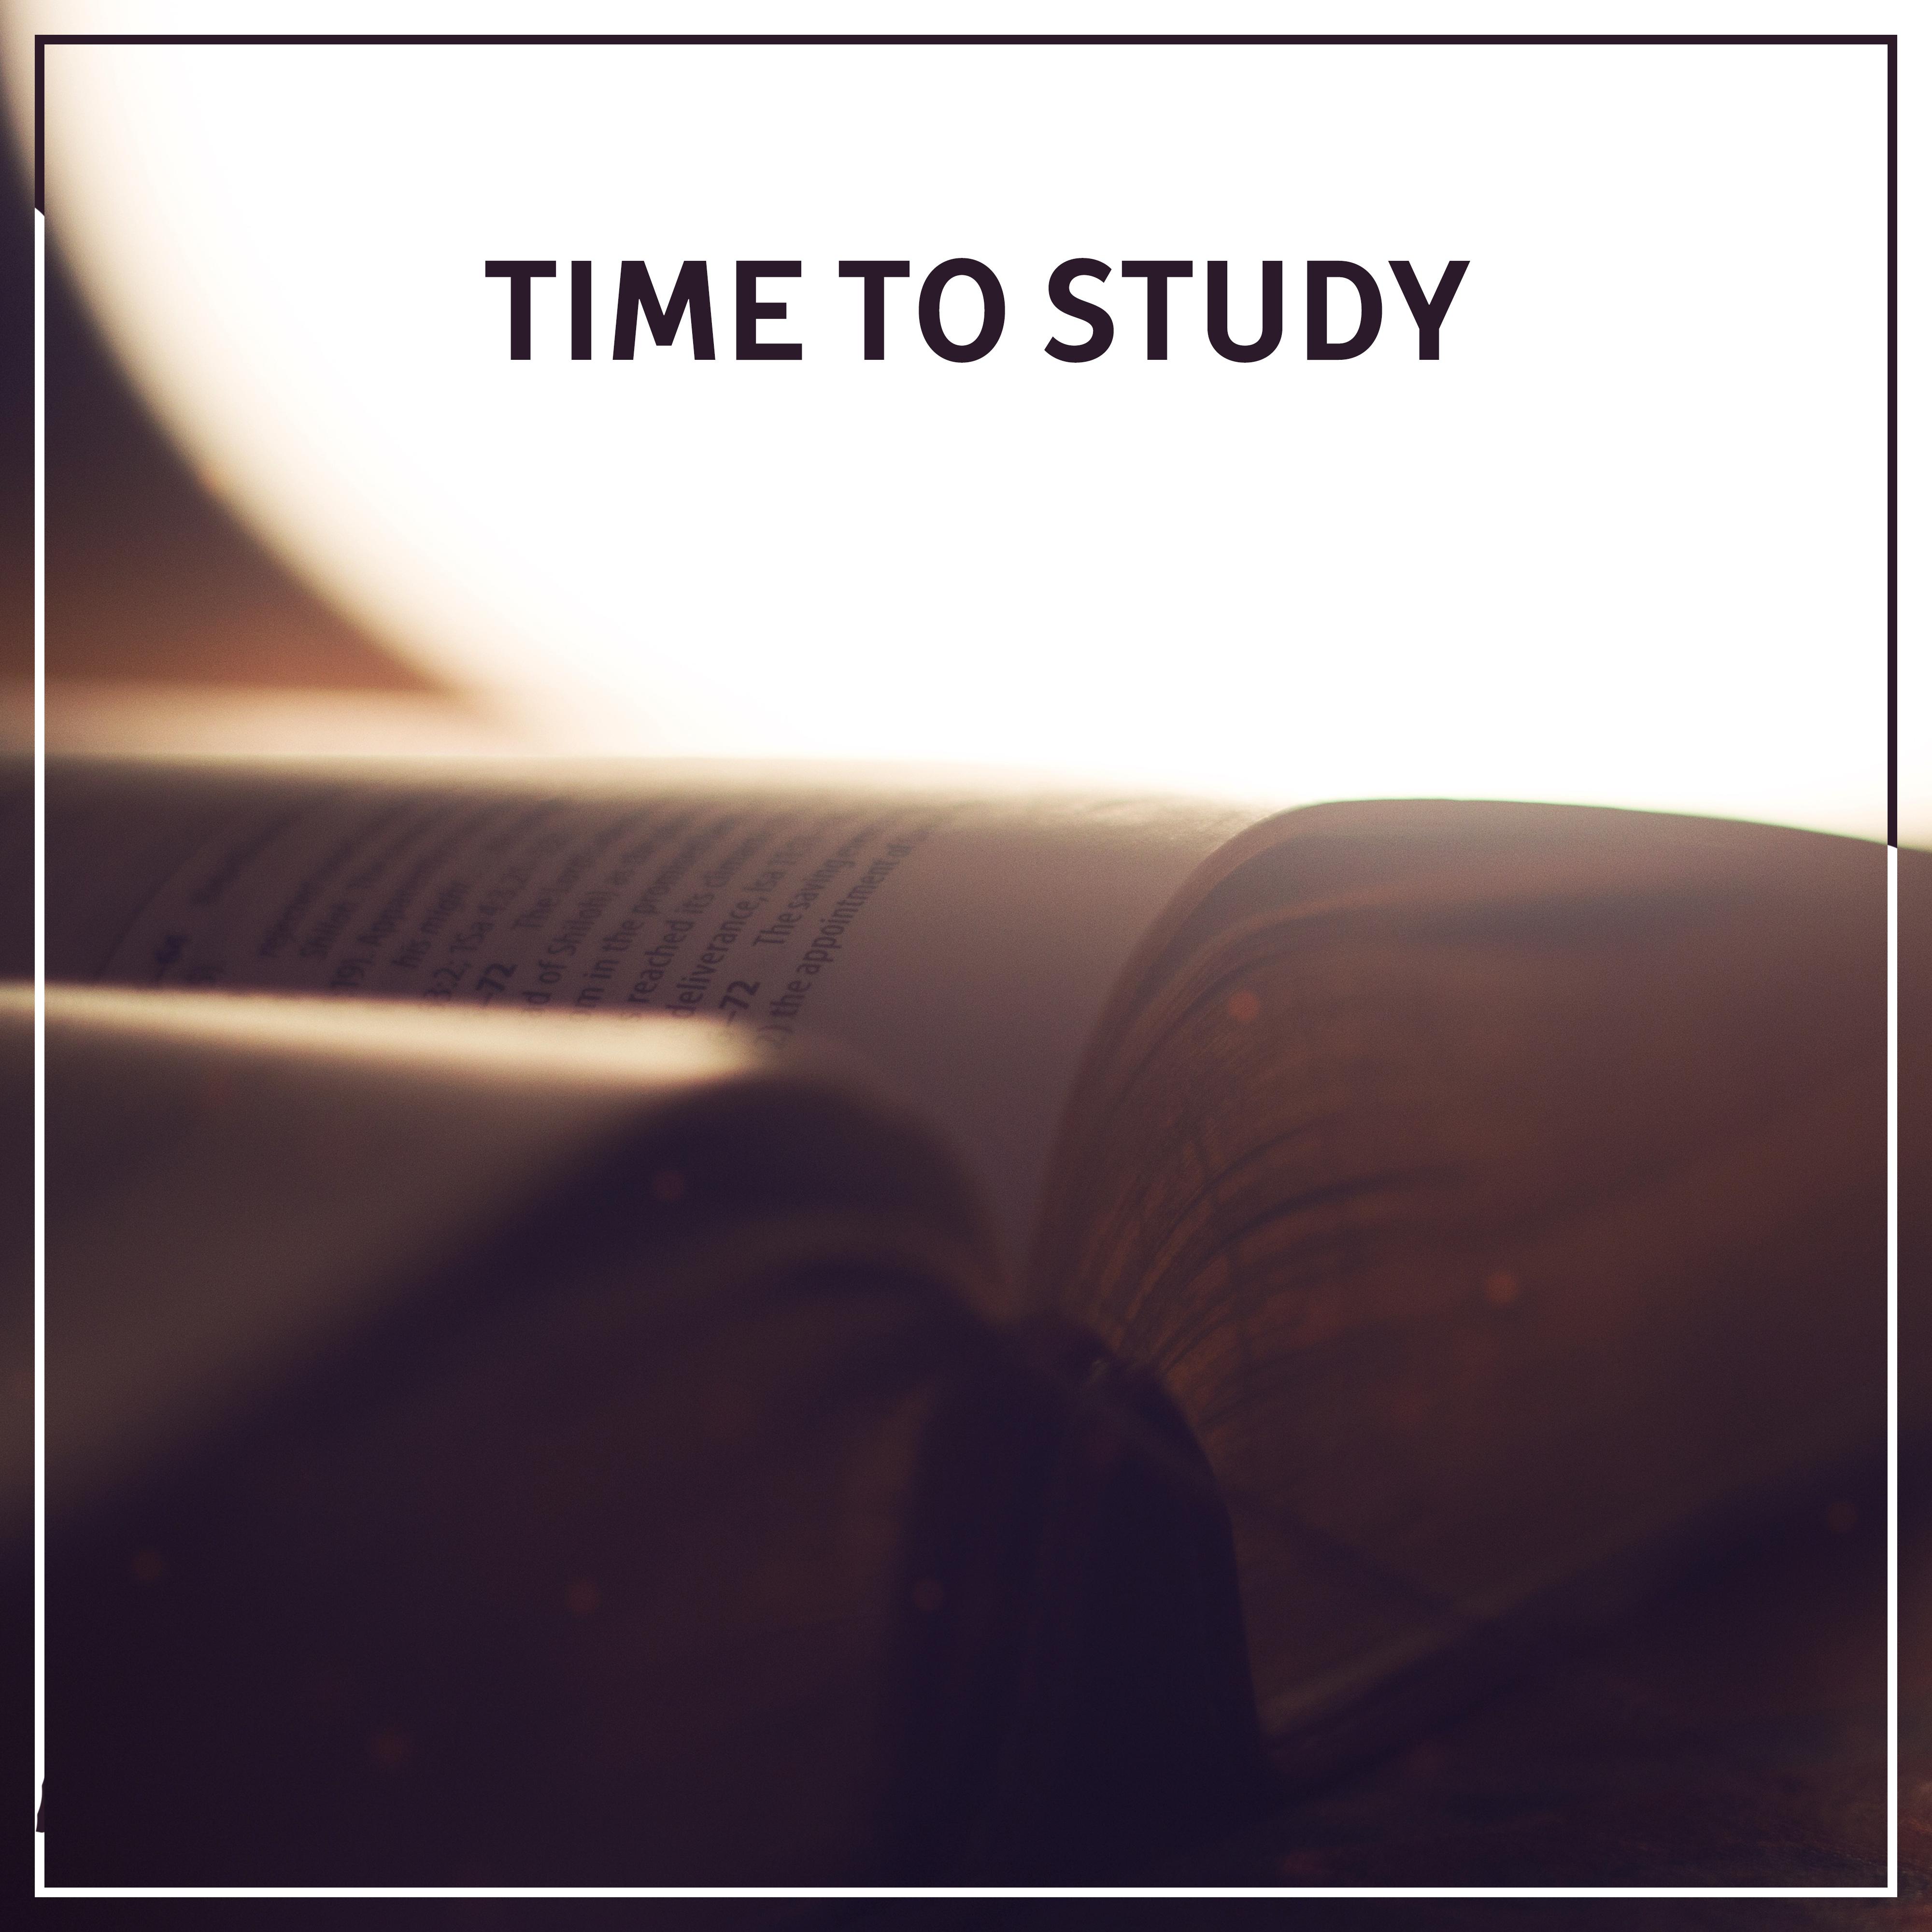 Time to Study – Classical Music to Help Focus, Good Way to Study, Learning Fast, Piano Music